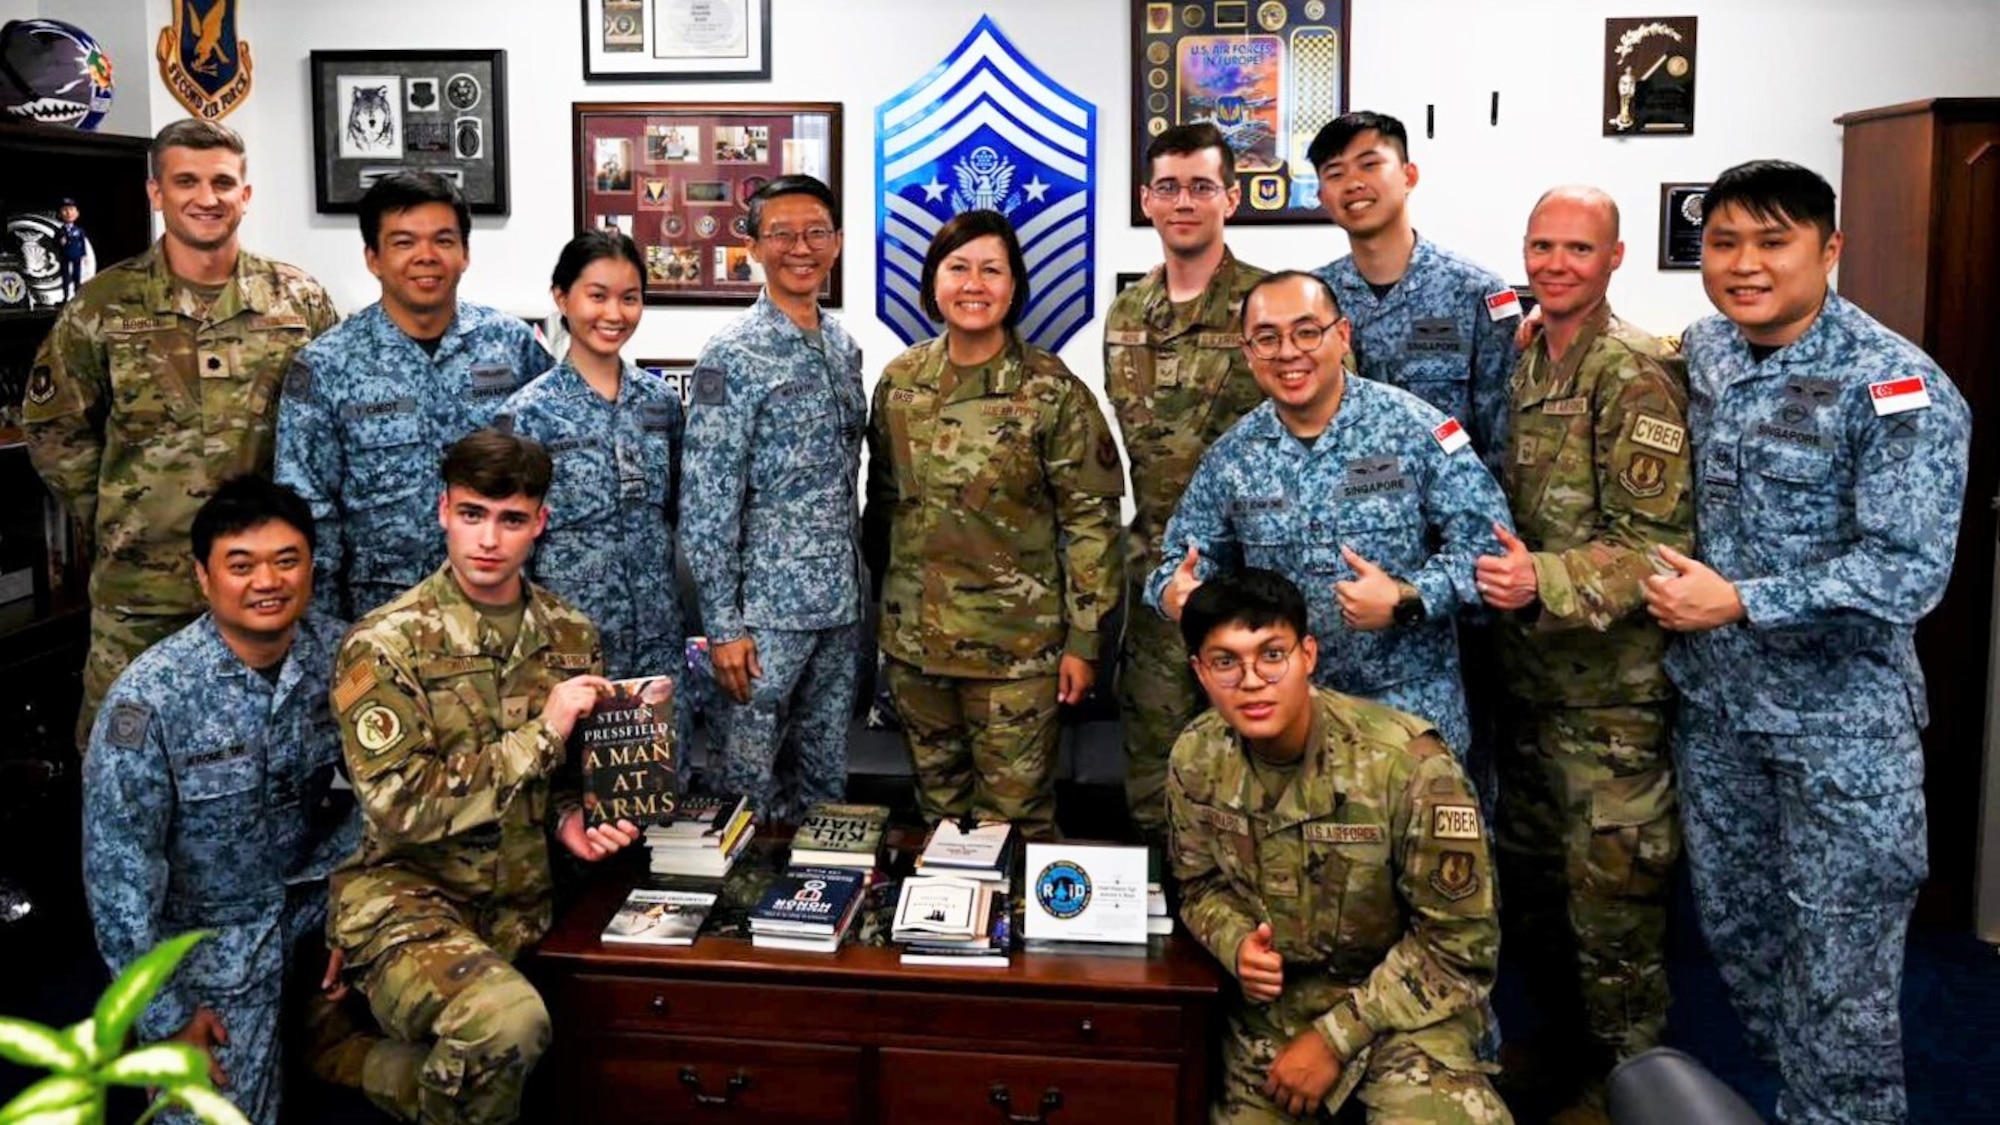 BESPIN and Singapore Air Force Group Photo with Chief Master Sergeant of the Air Force JoAnne S. Bass